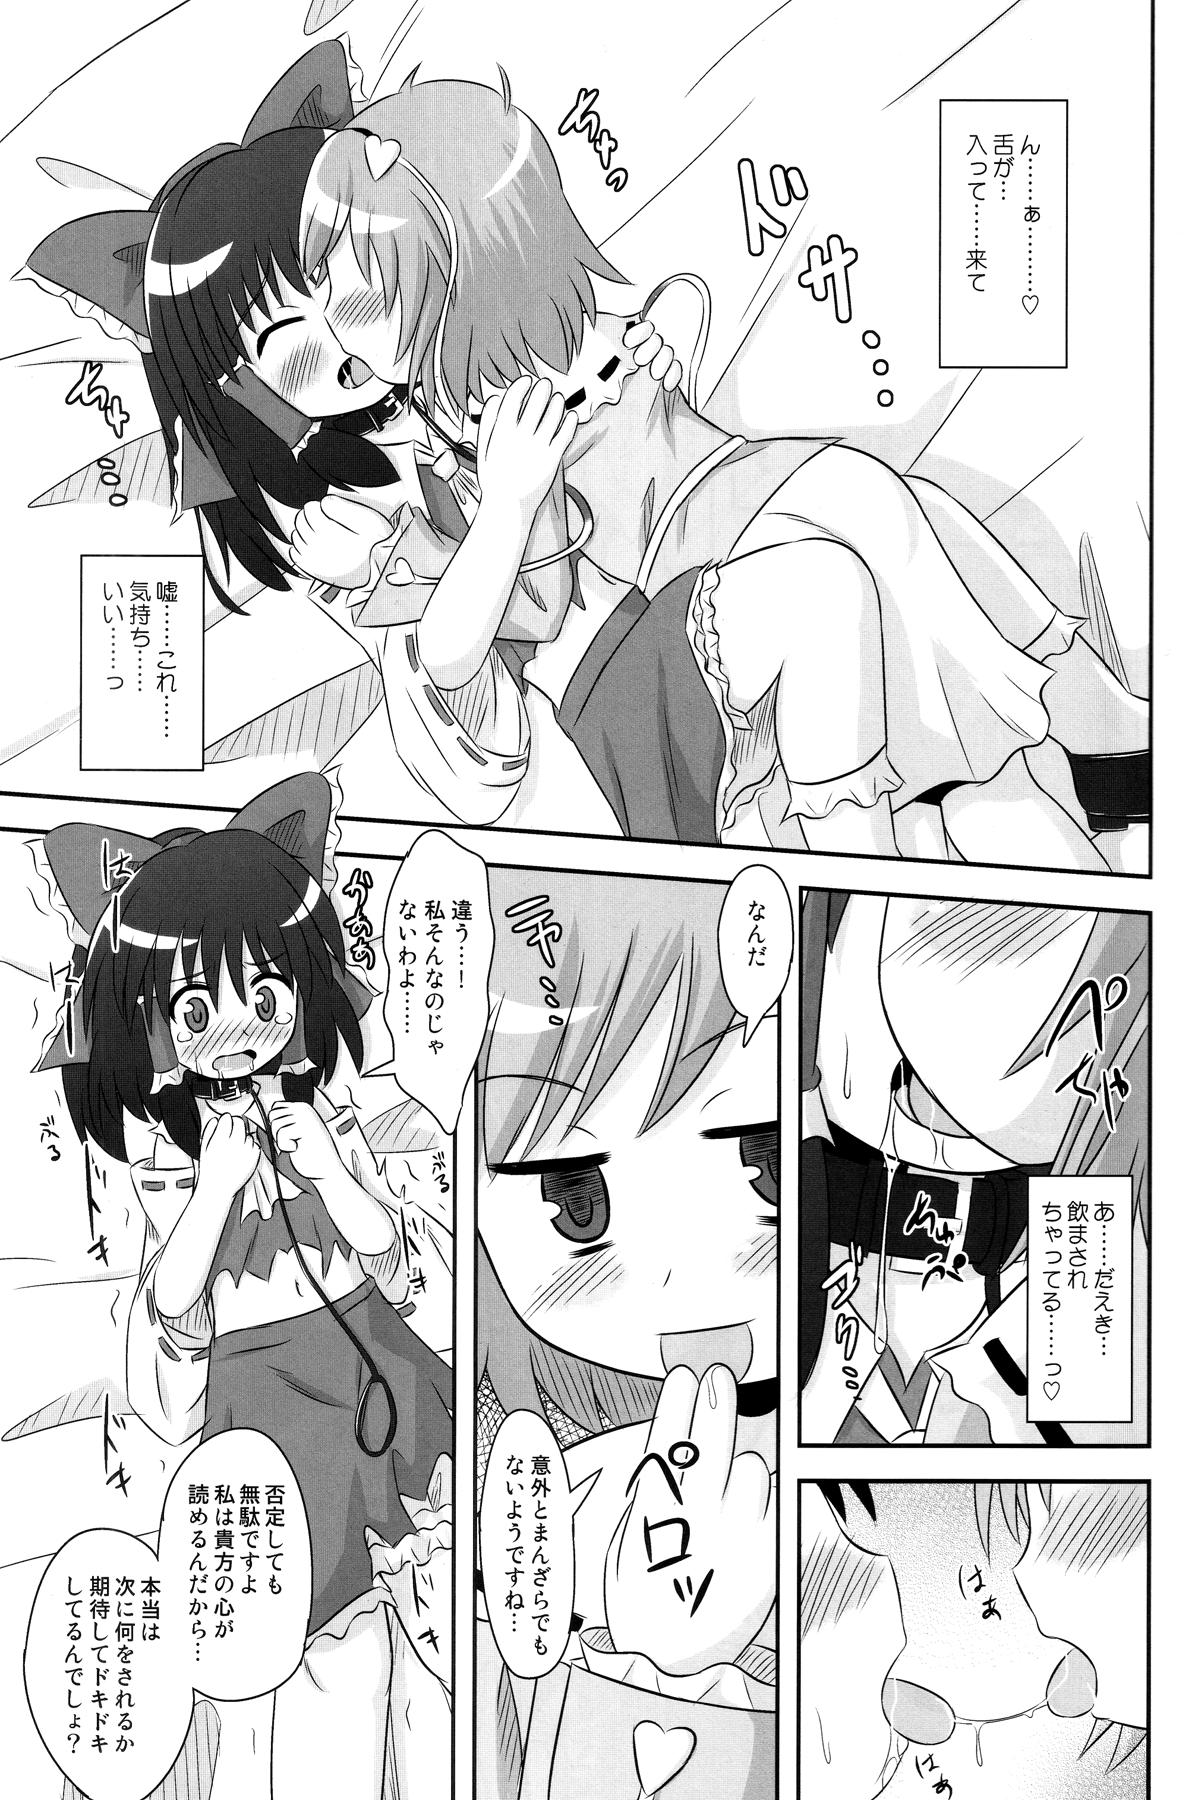 Insertion Subterranean Taming - Touhou project Pick Up - Page 6